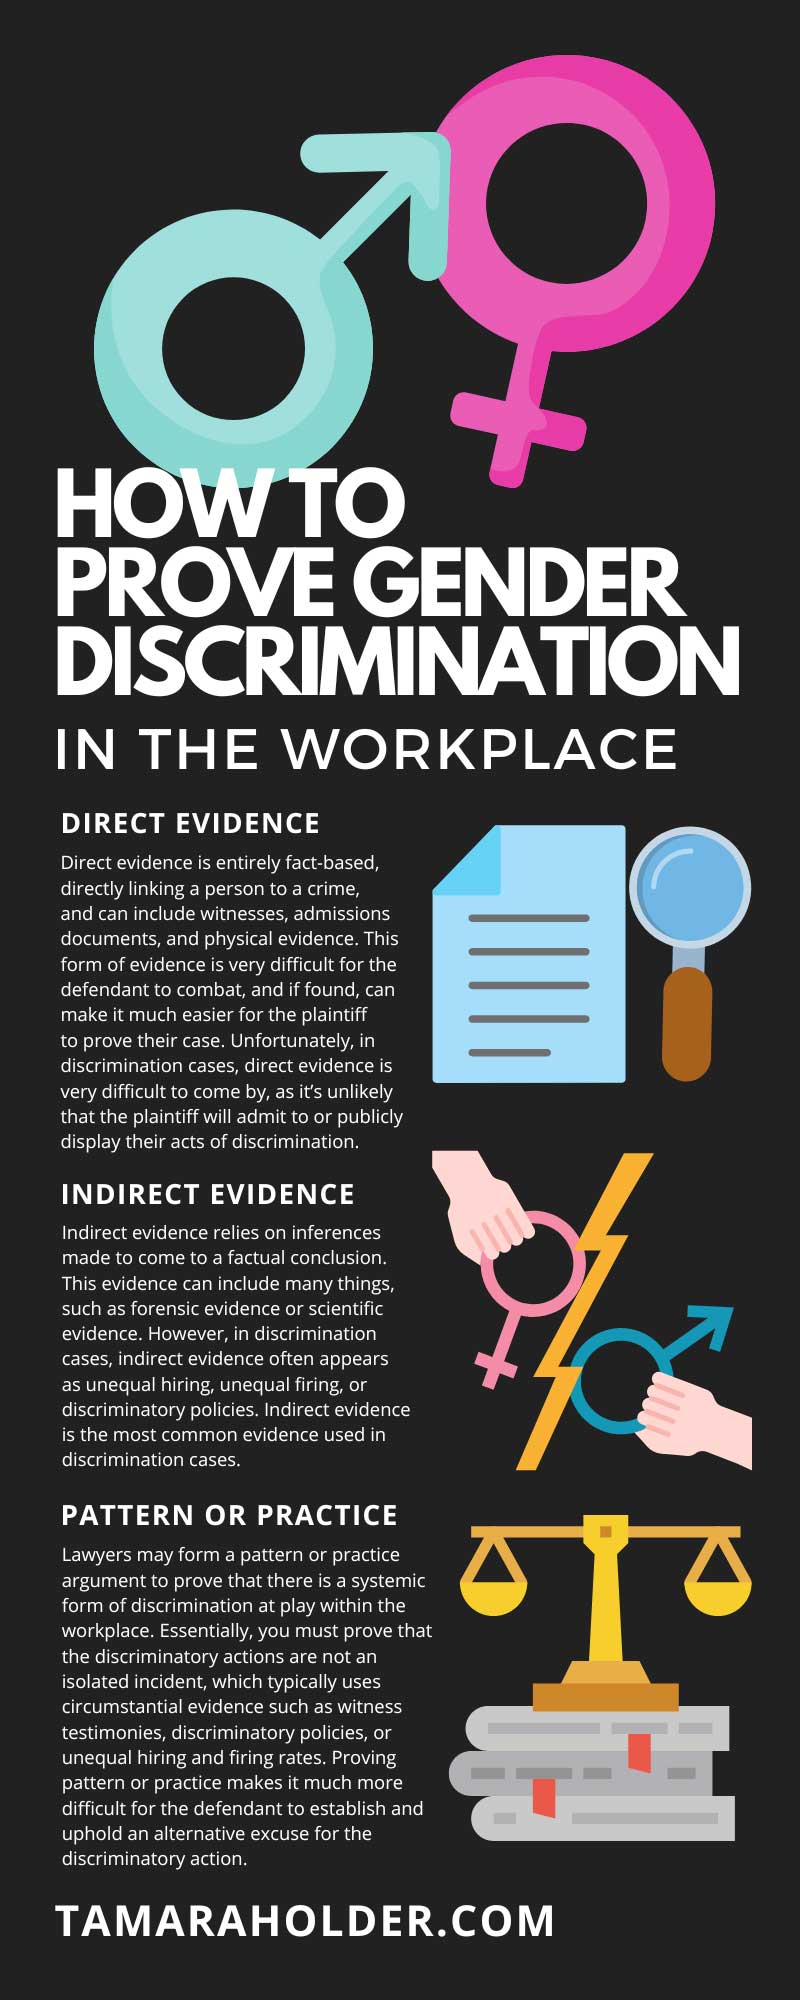 How To Prove Gender Discrimination in the Workplace